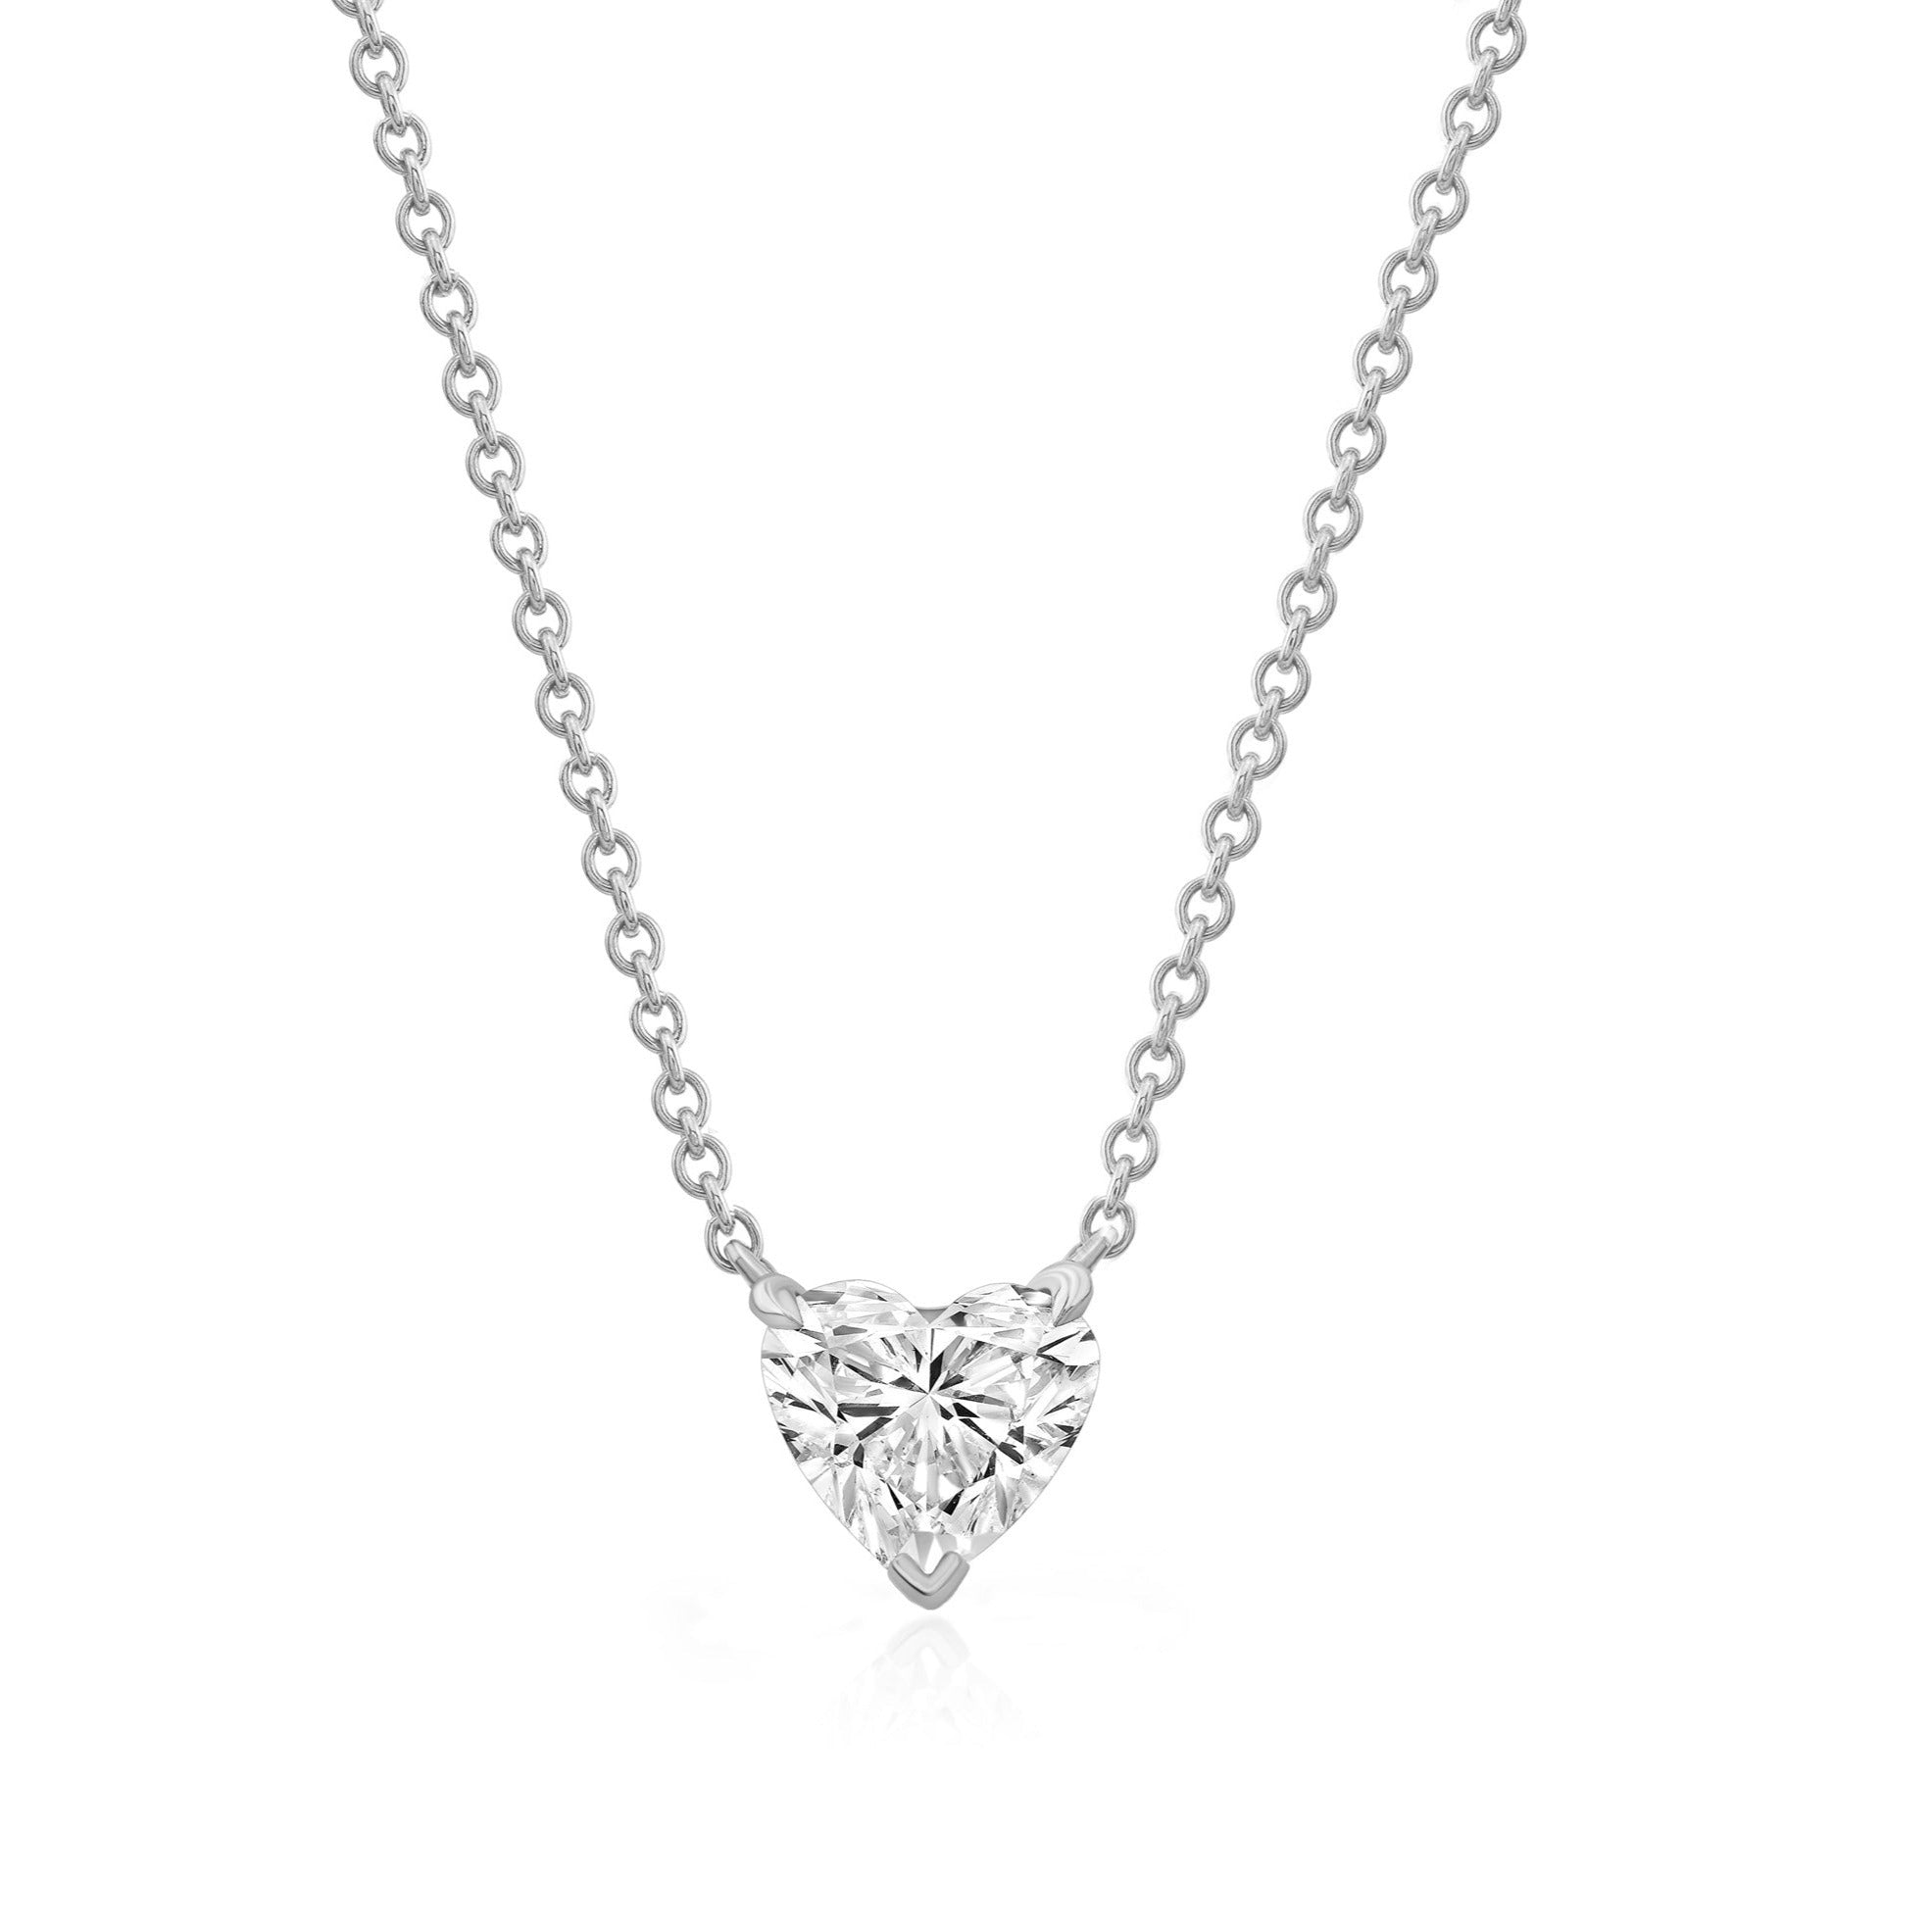 Diamond Heart Solitaire Necklace in 14k white gold with 1 carat heart shaped diamond